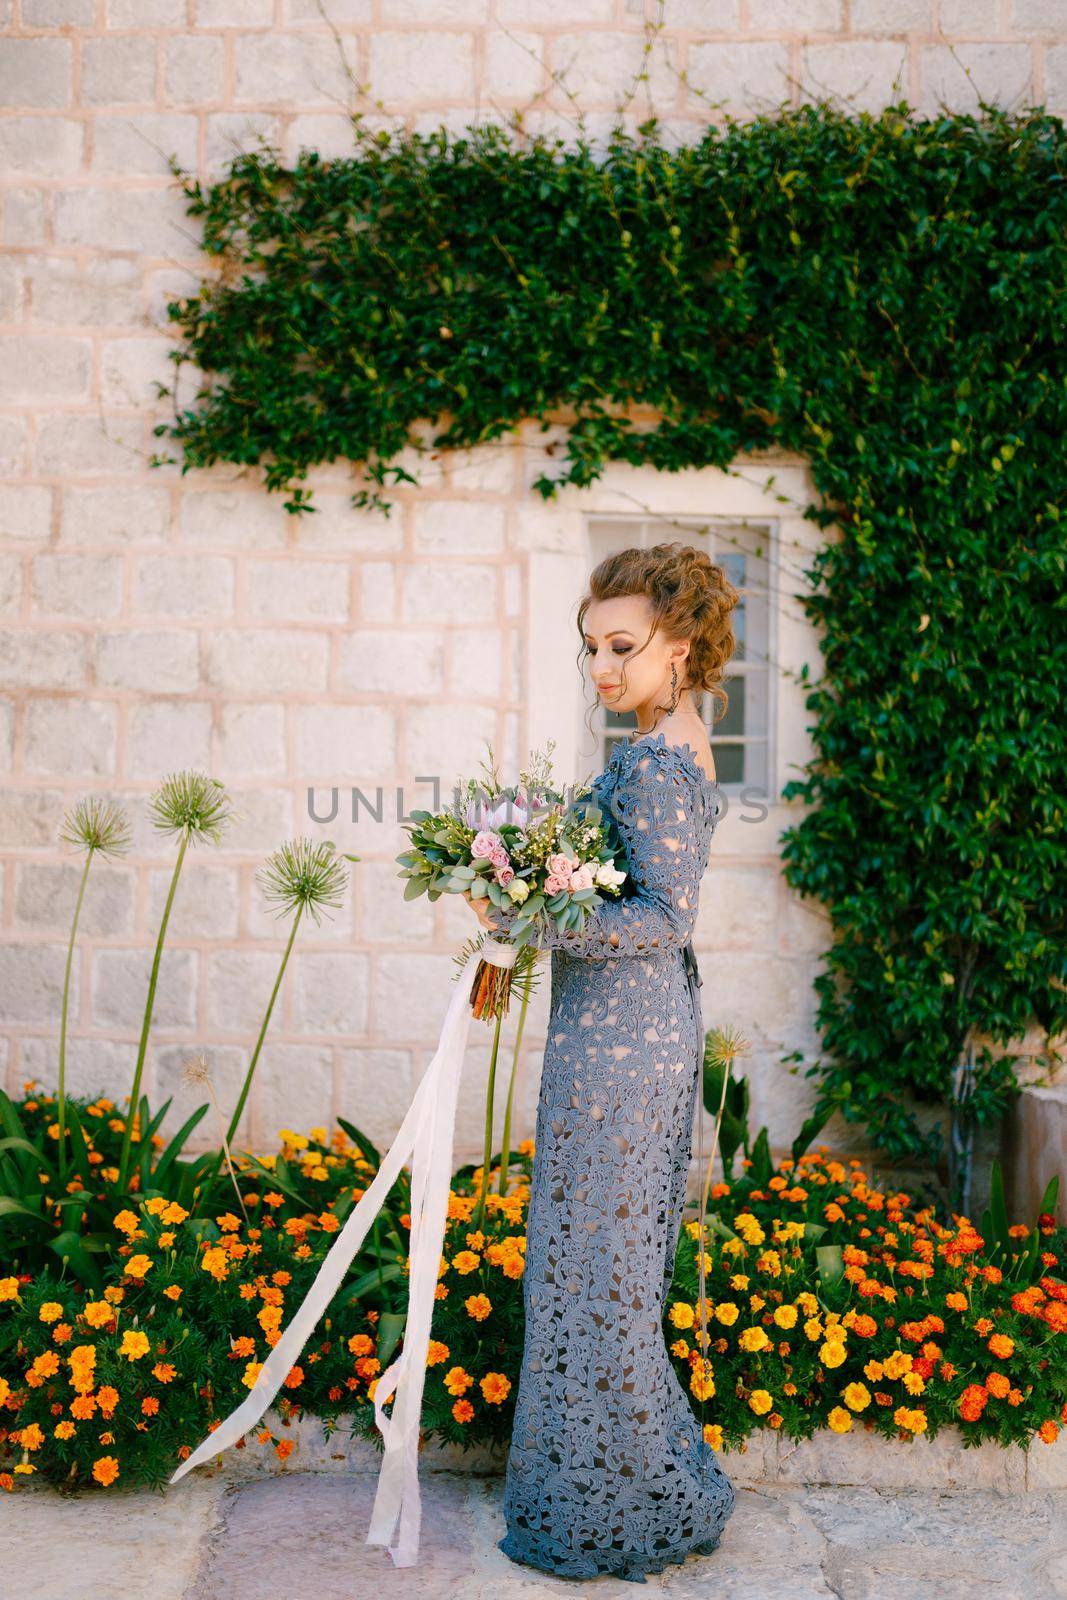 A bride in a blue dress with a bouquet stands at the wall of a house with a green liana and orange flowers, close-up. High quality photo